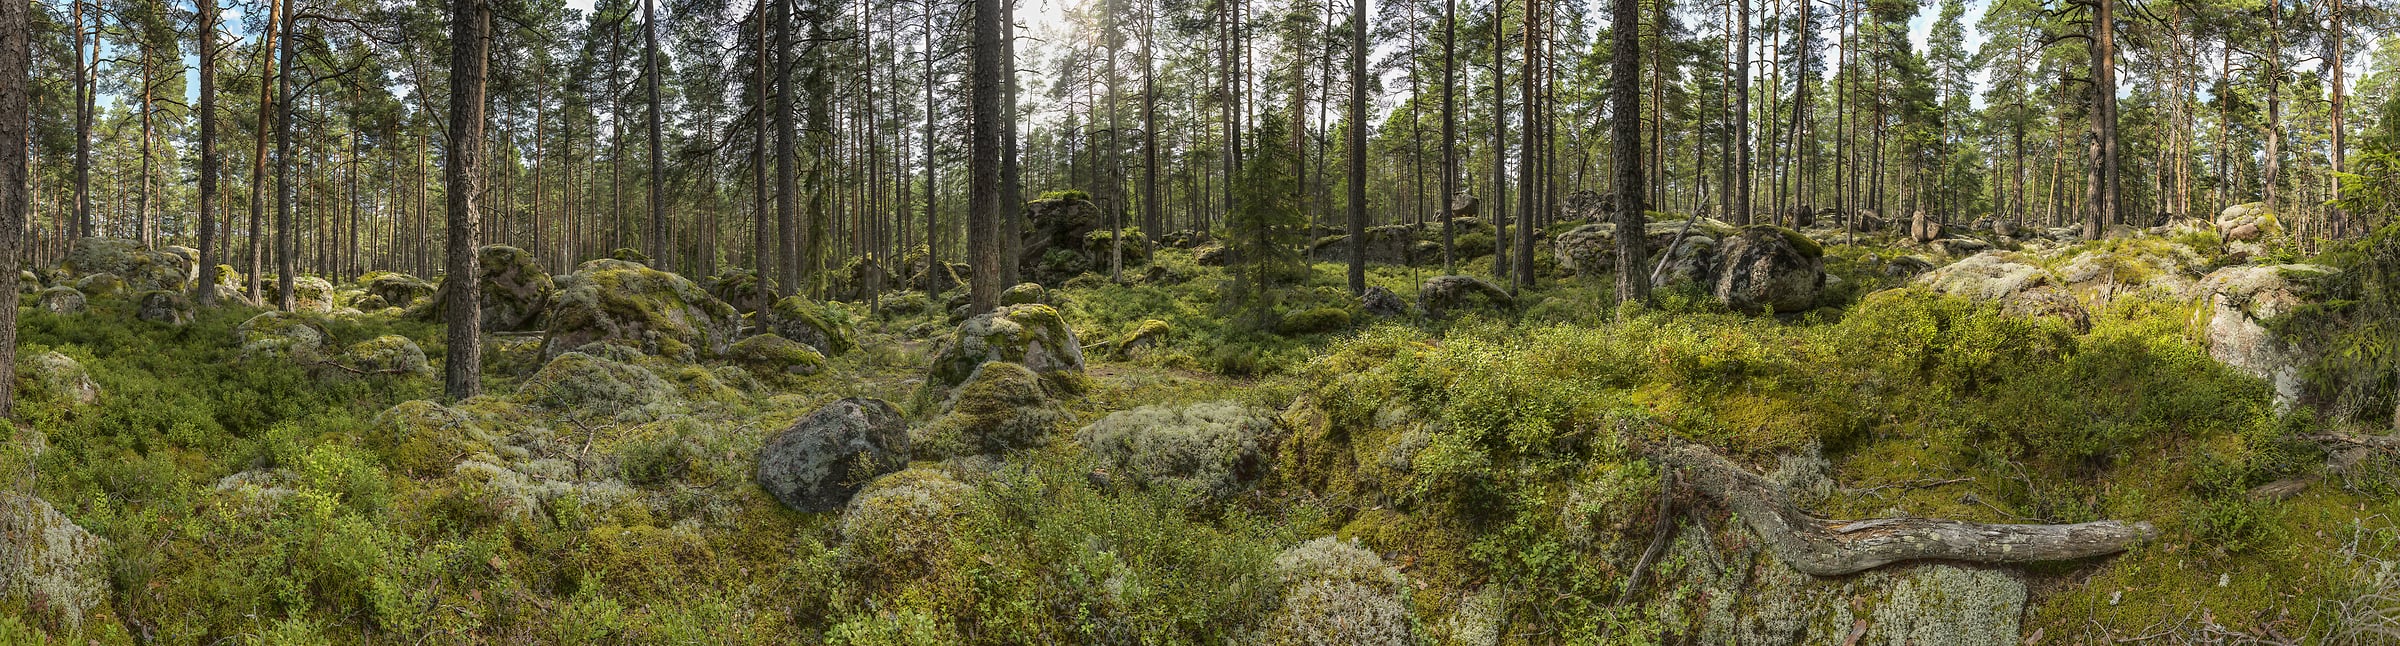 6,131 megapixels! A very high resolution, VAST photo of a forest created by Alfred Feil in Sweden